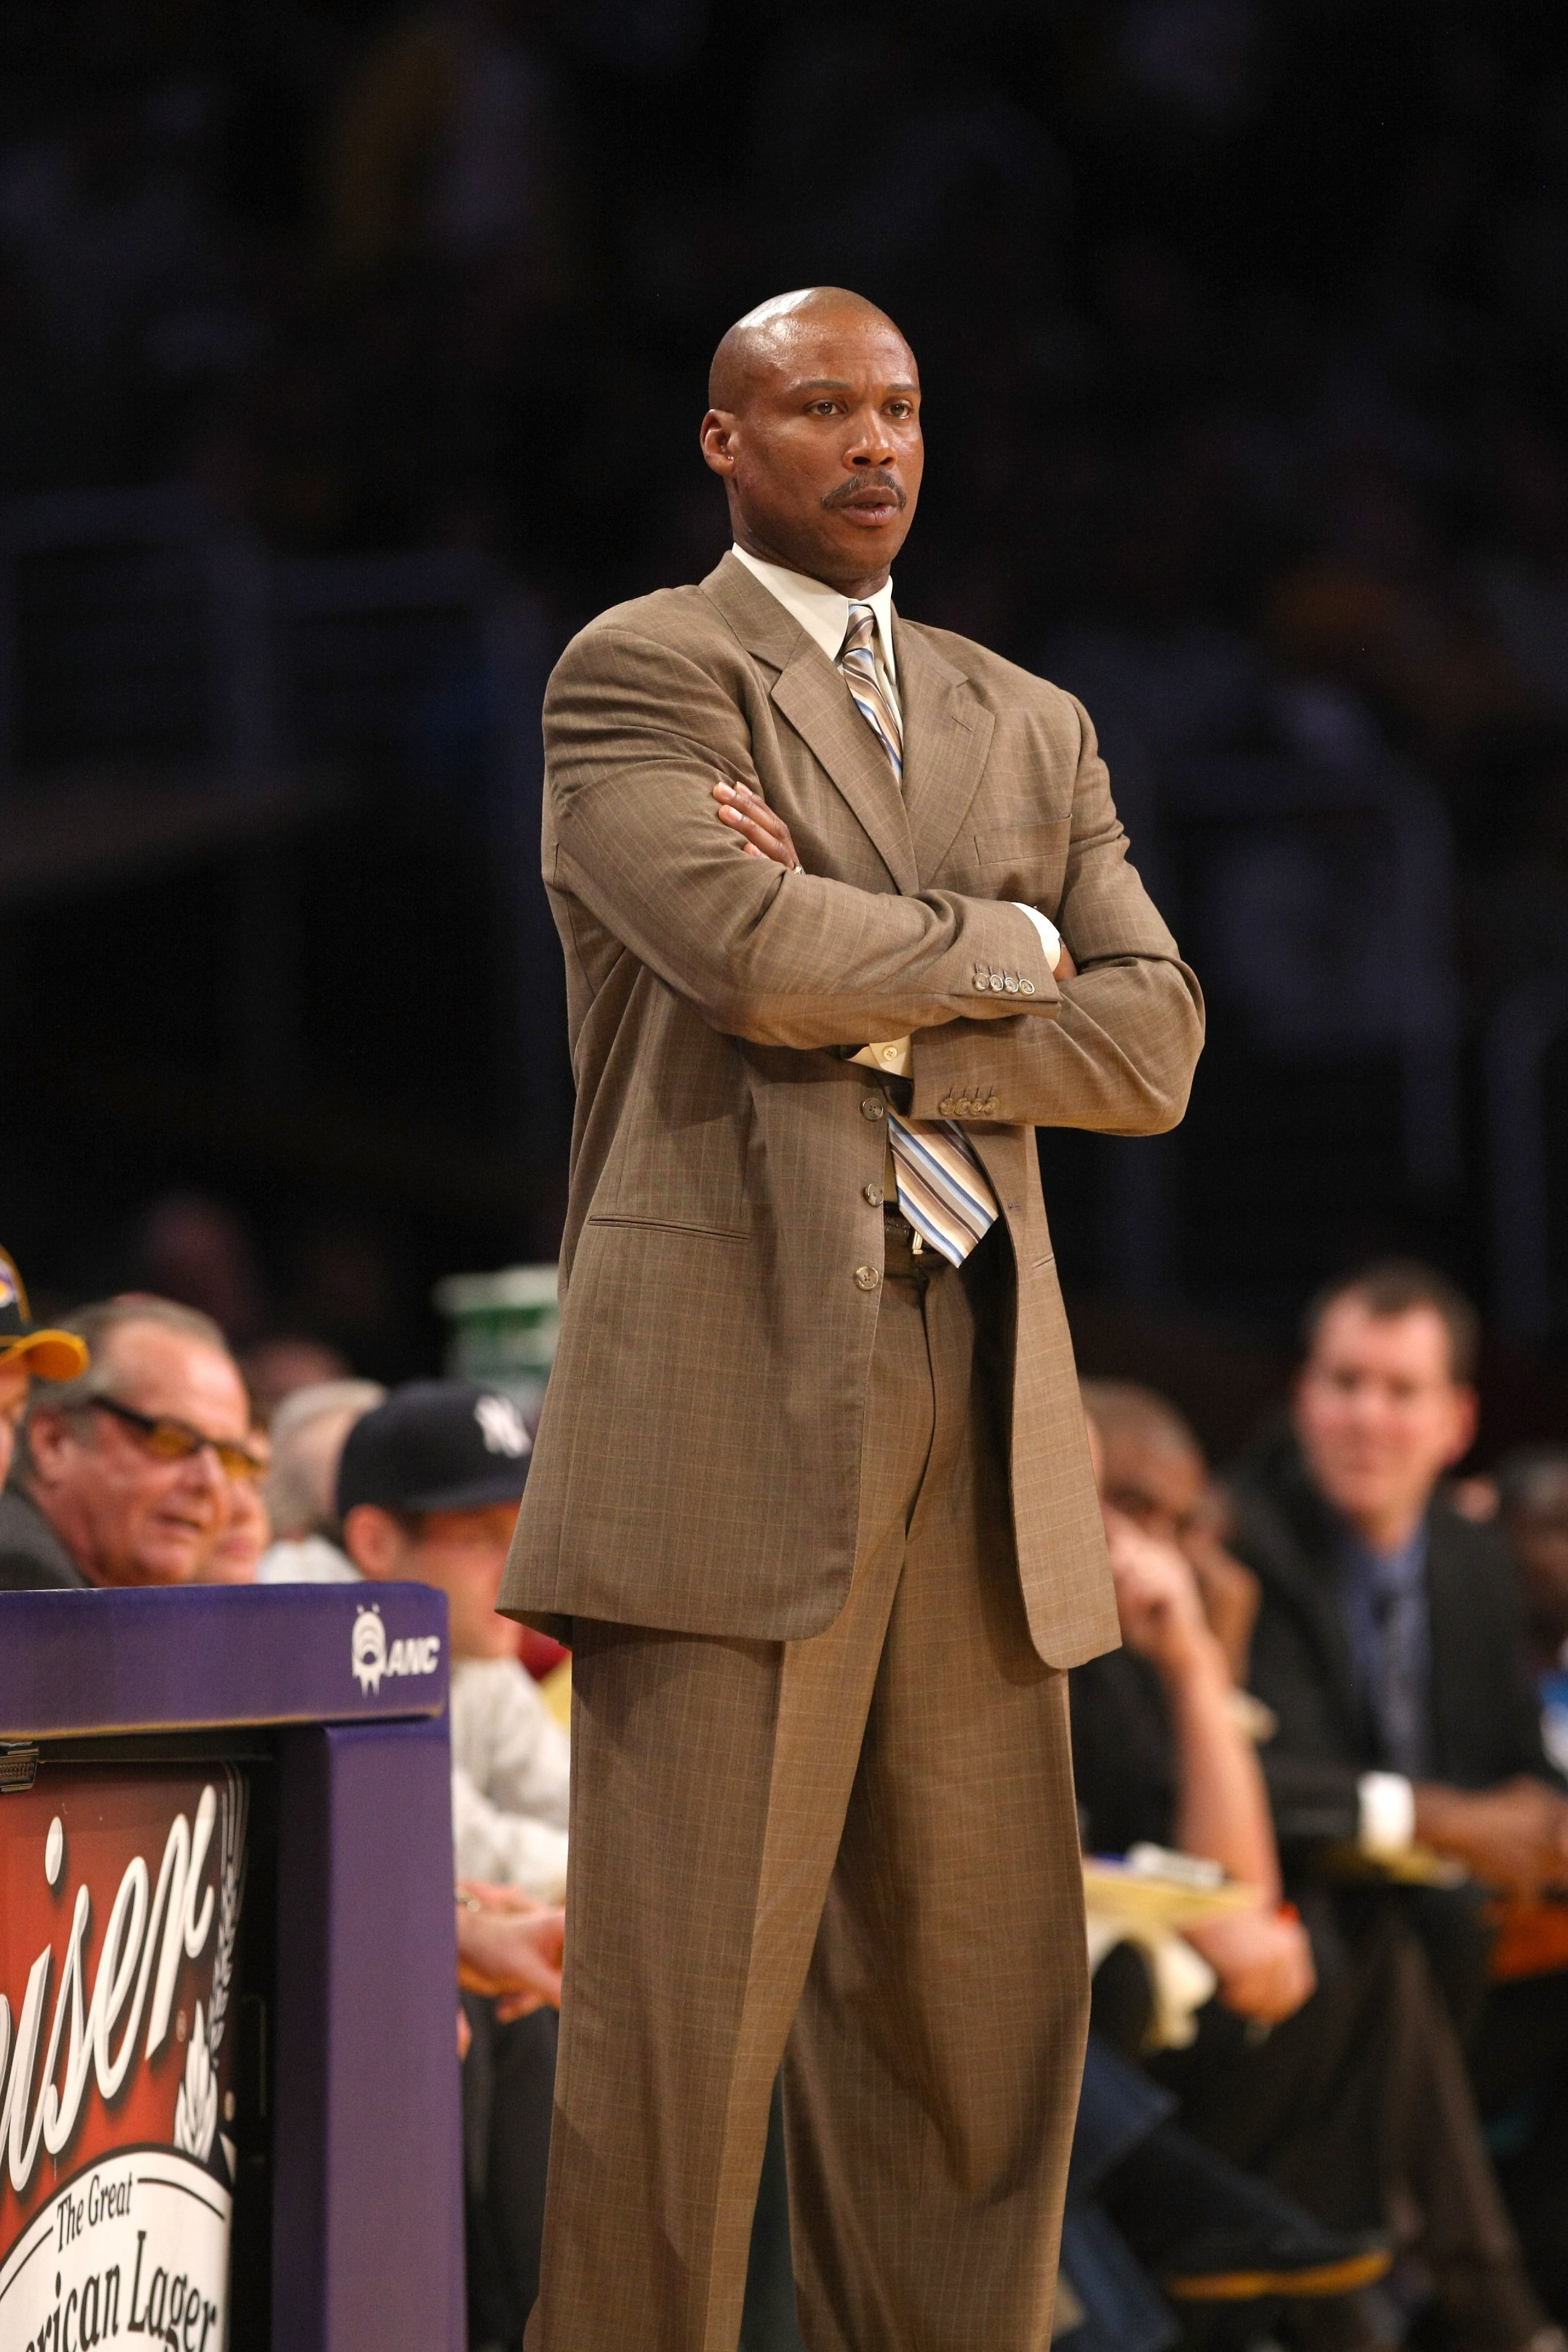 LOS ANGELES, CA - NOVEMBER 08:  Head coach Byron Scott of the New Orleans Hornets looks on during the game with the Los Angeles Lakers on November 8, 2009 at Staples Center in Los Angeles, California. The Lakers won 104-88.  NOTE TO USER: User expressly a